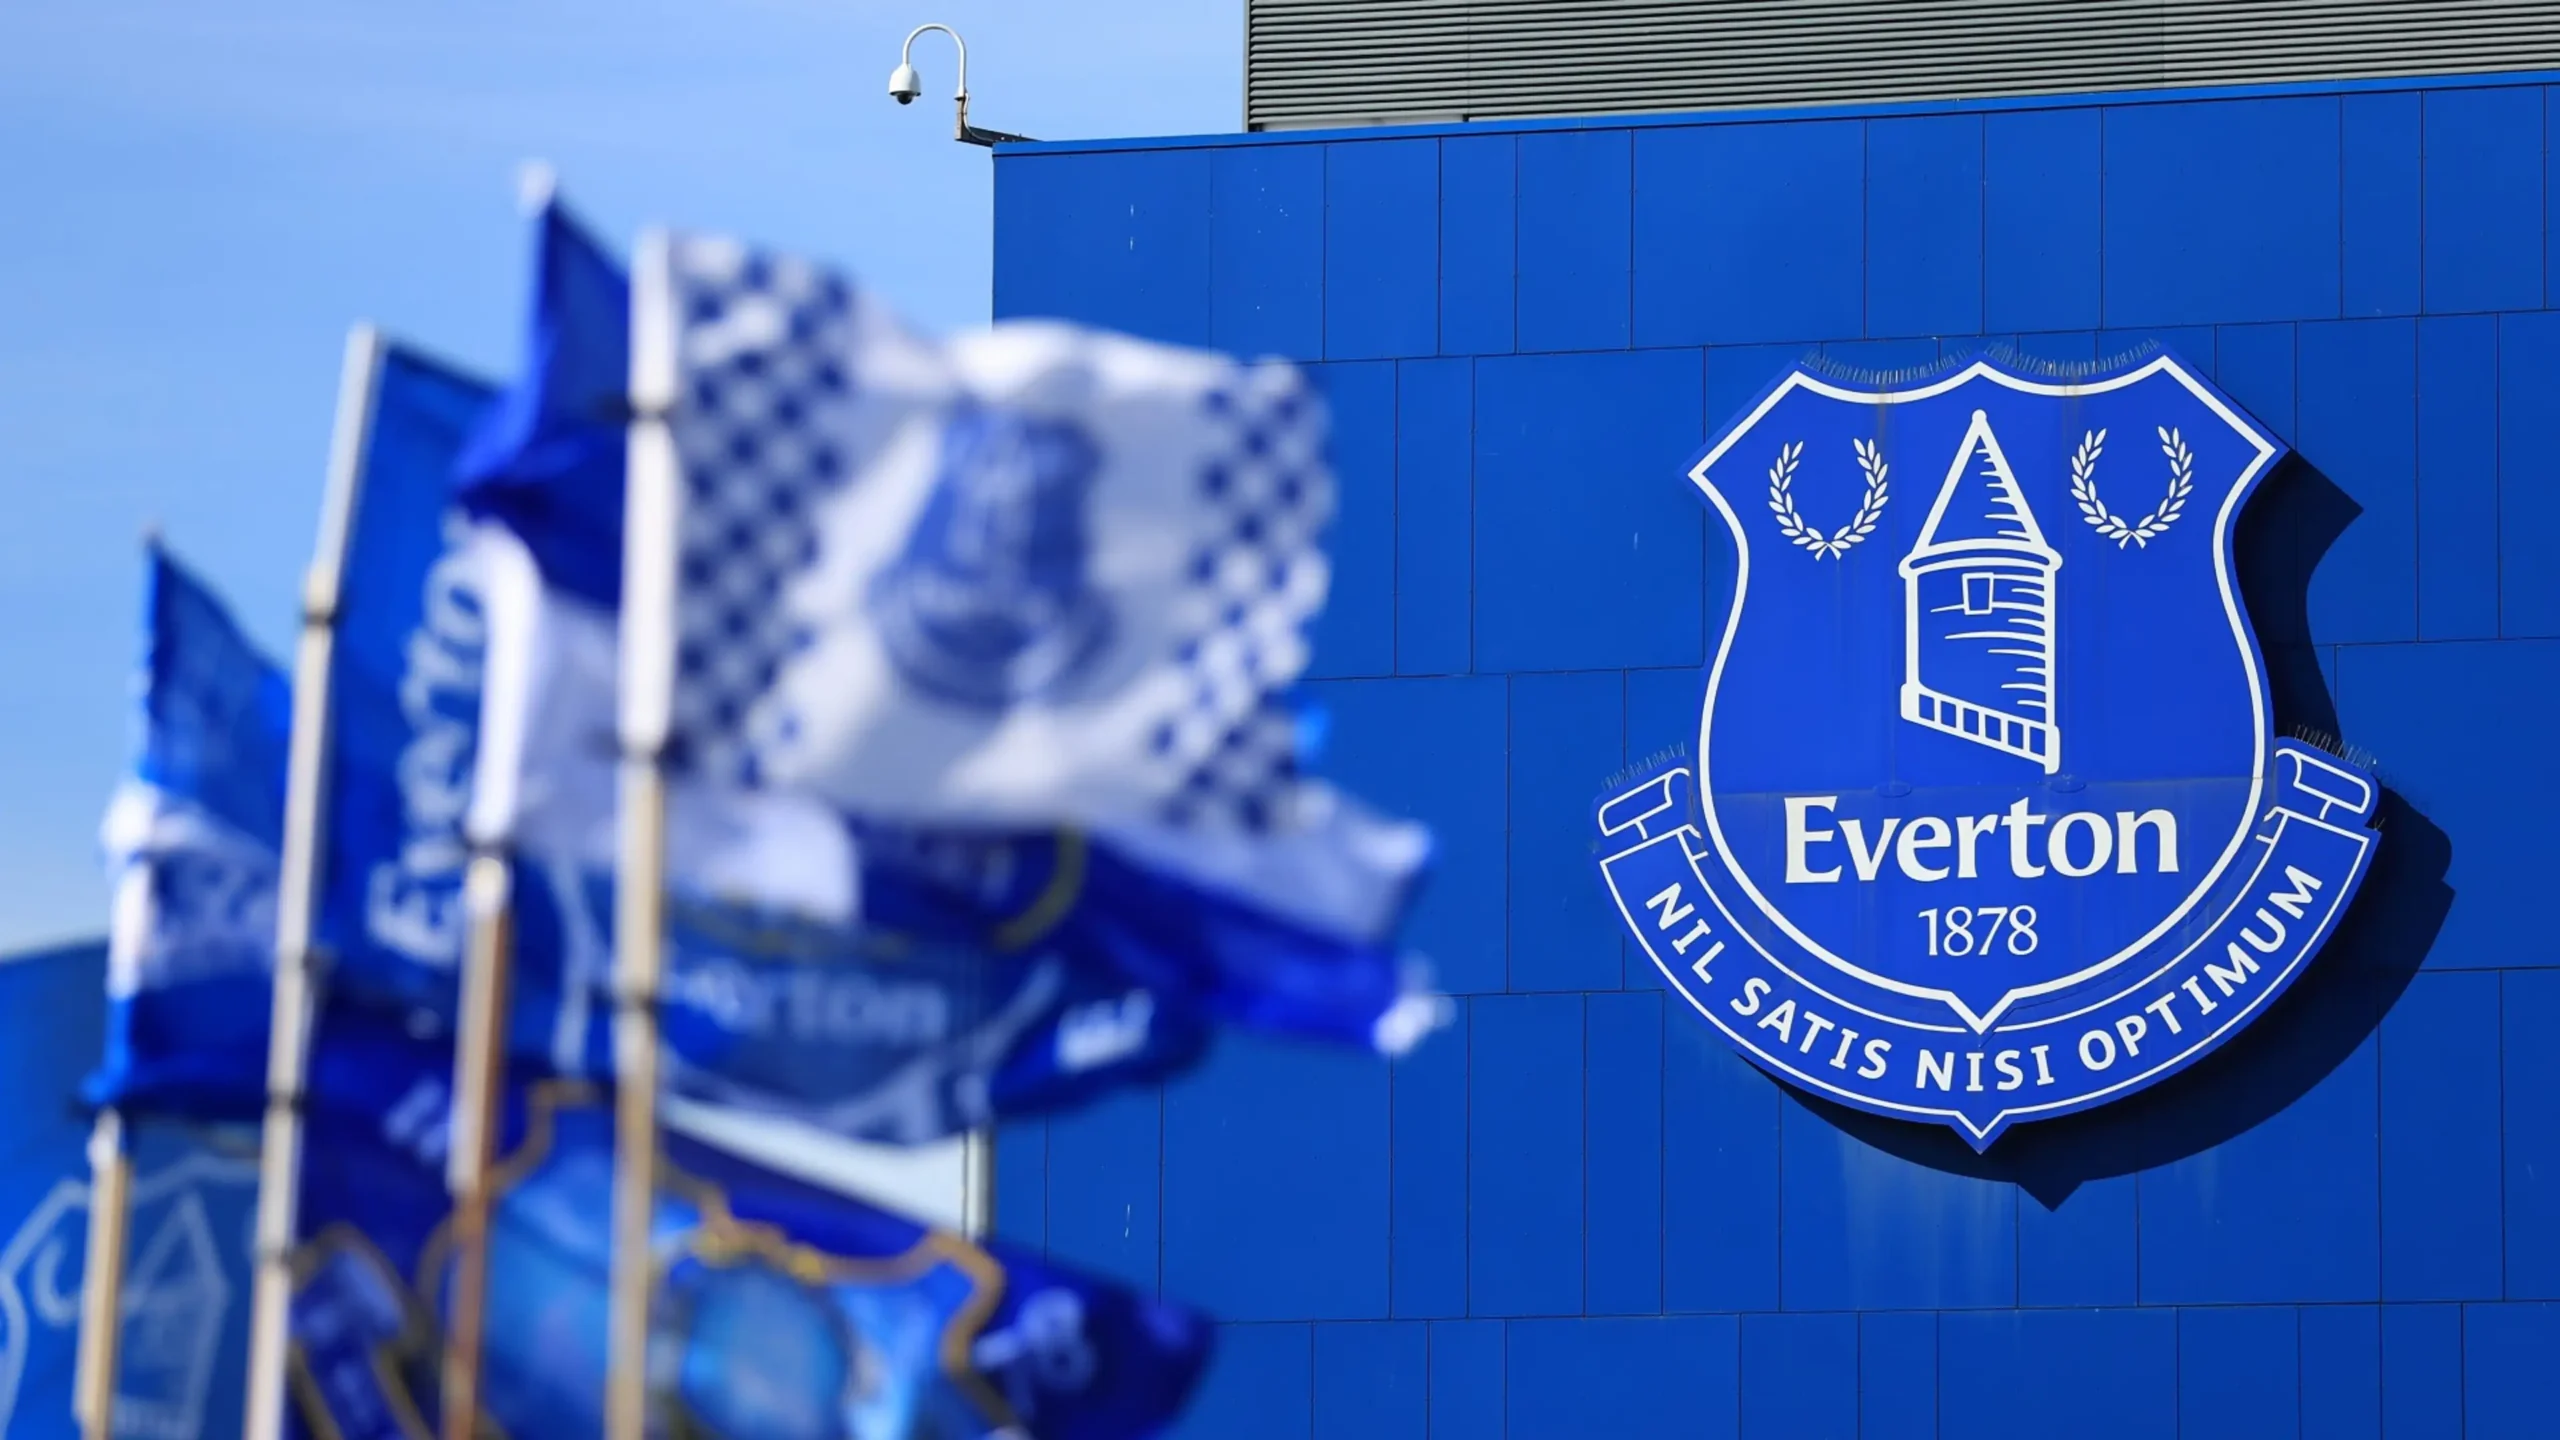 NEWS UPDATE: Everton could repeat their player masterclass with swoop for £10m “outstanding talent…